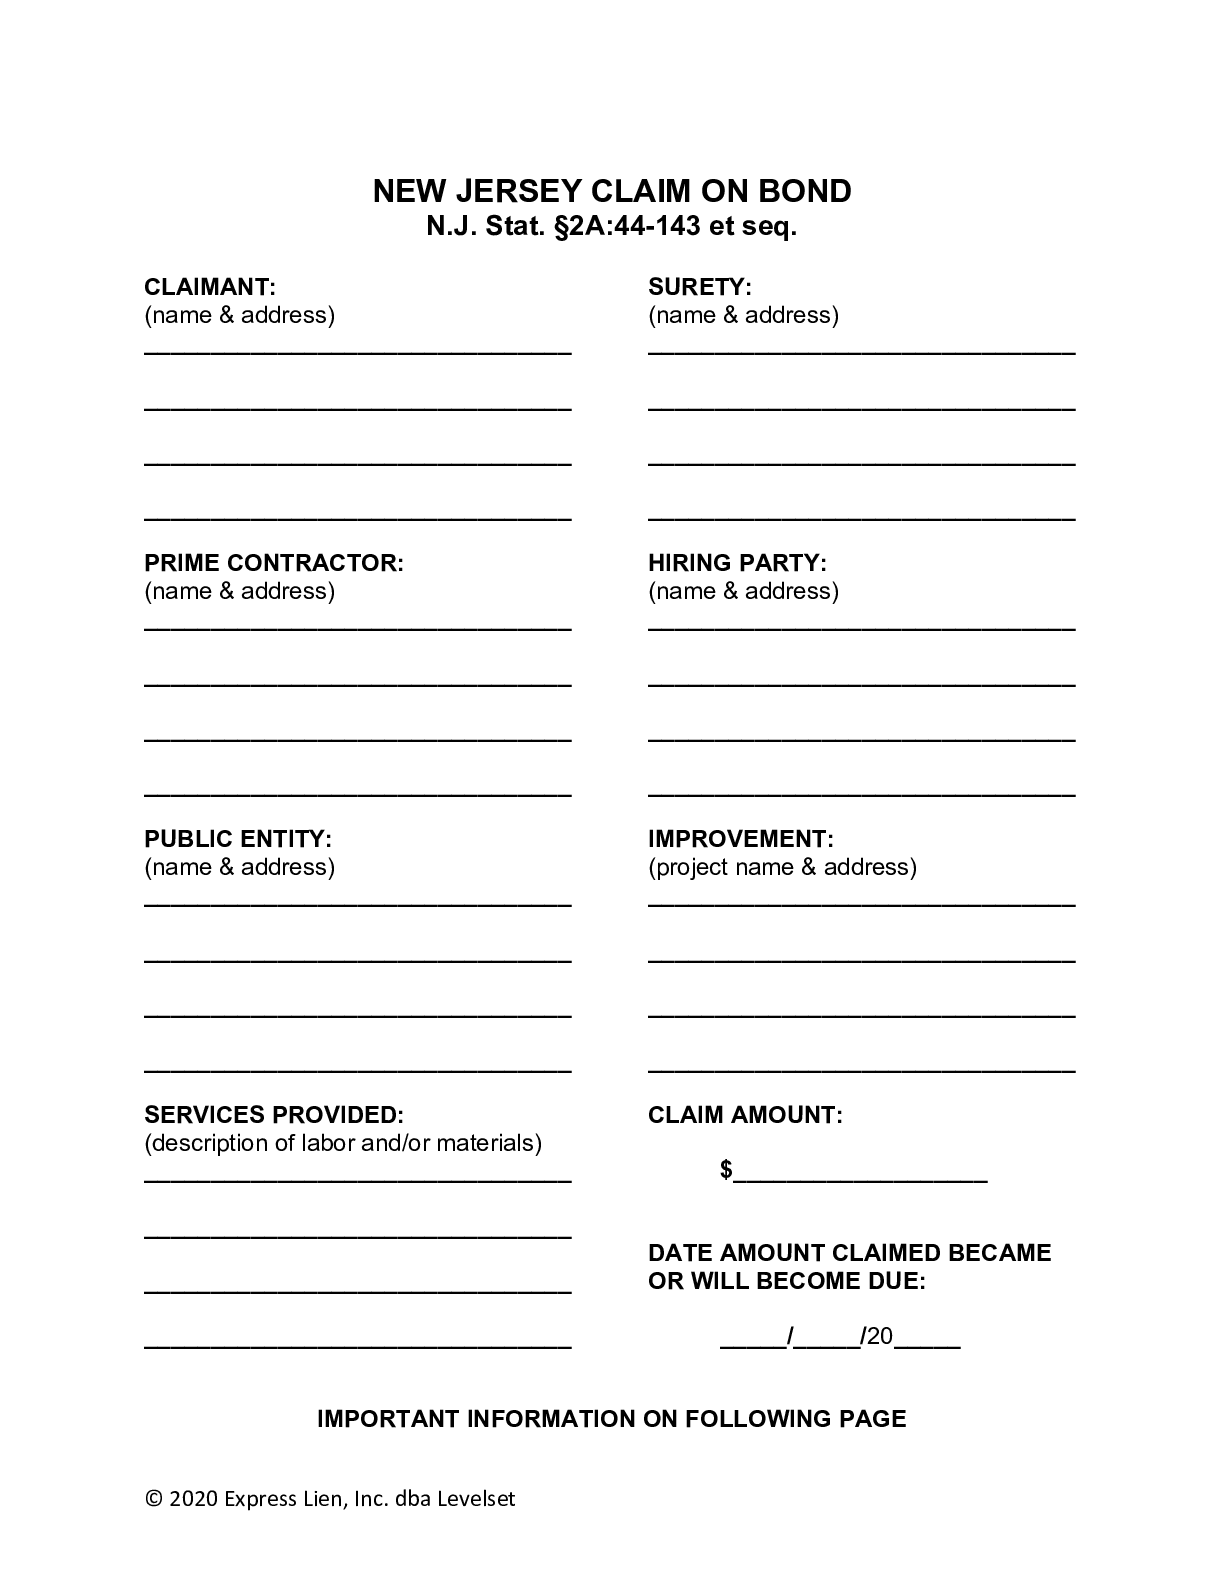 New Jersey Public Bond Claim Form - free from